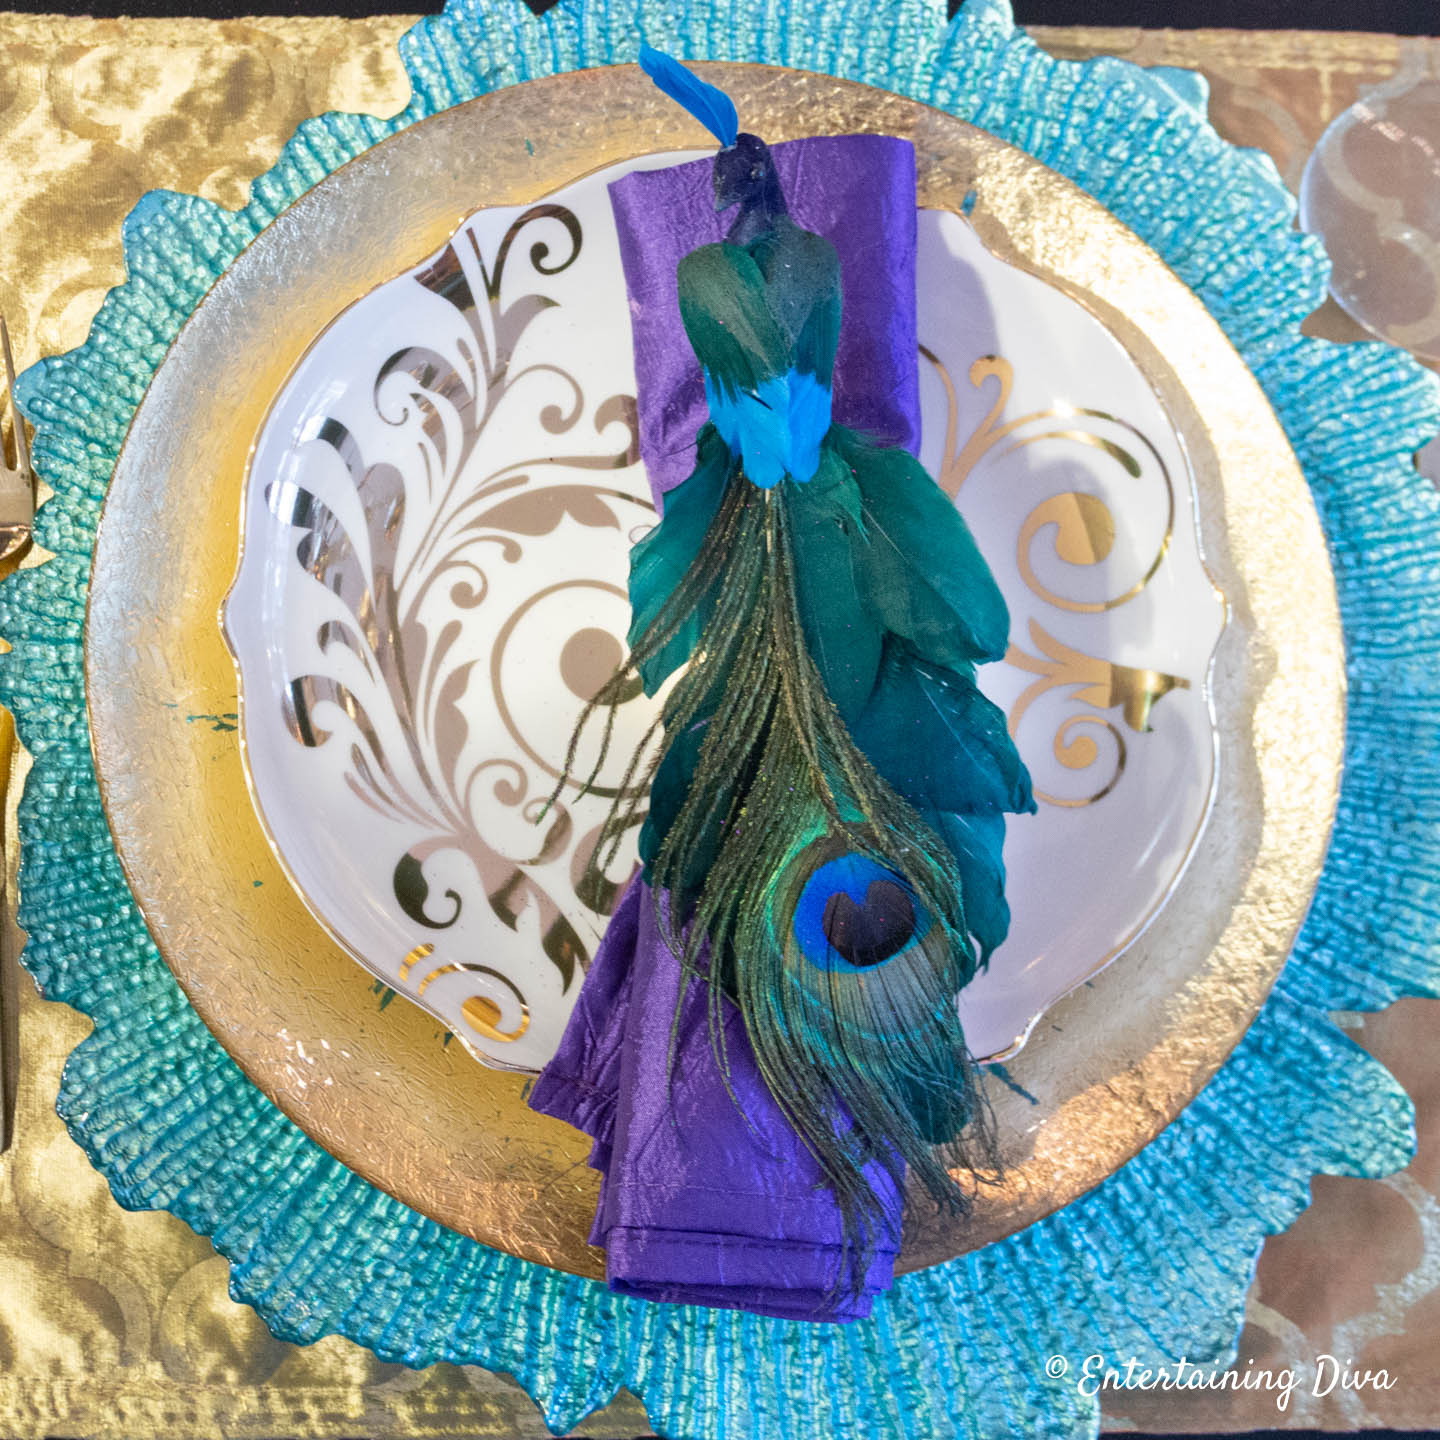 Peacock place setting with purple napkin, turquoise charger and gold plate